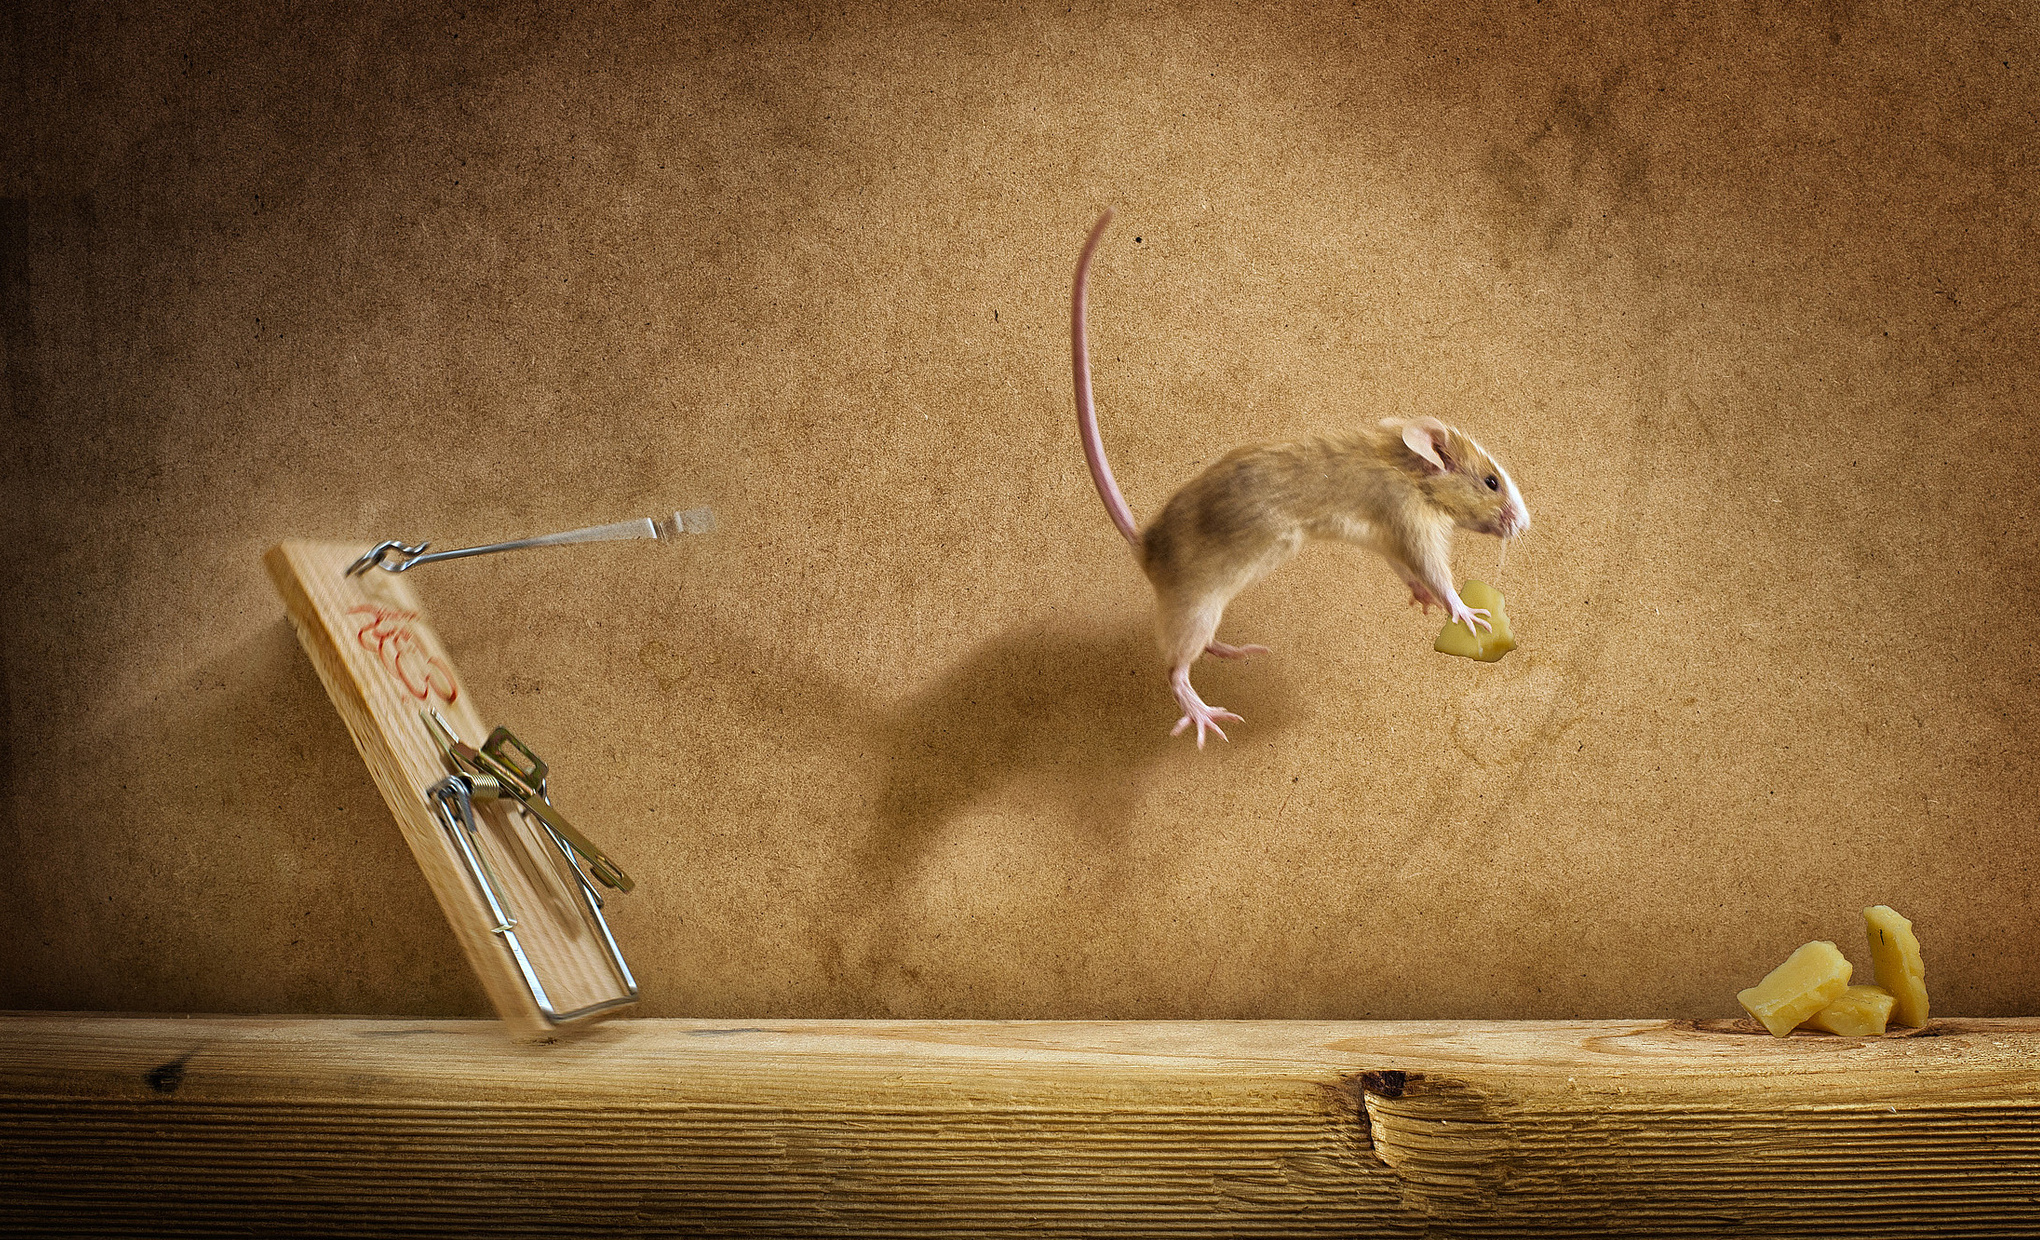 Mousetrap Mish Flight Cheese Mouse Wallpaper Background